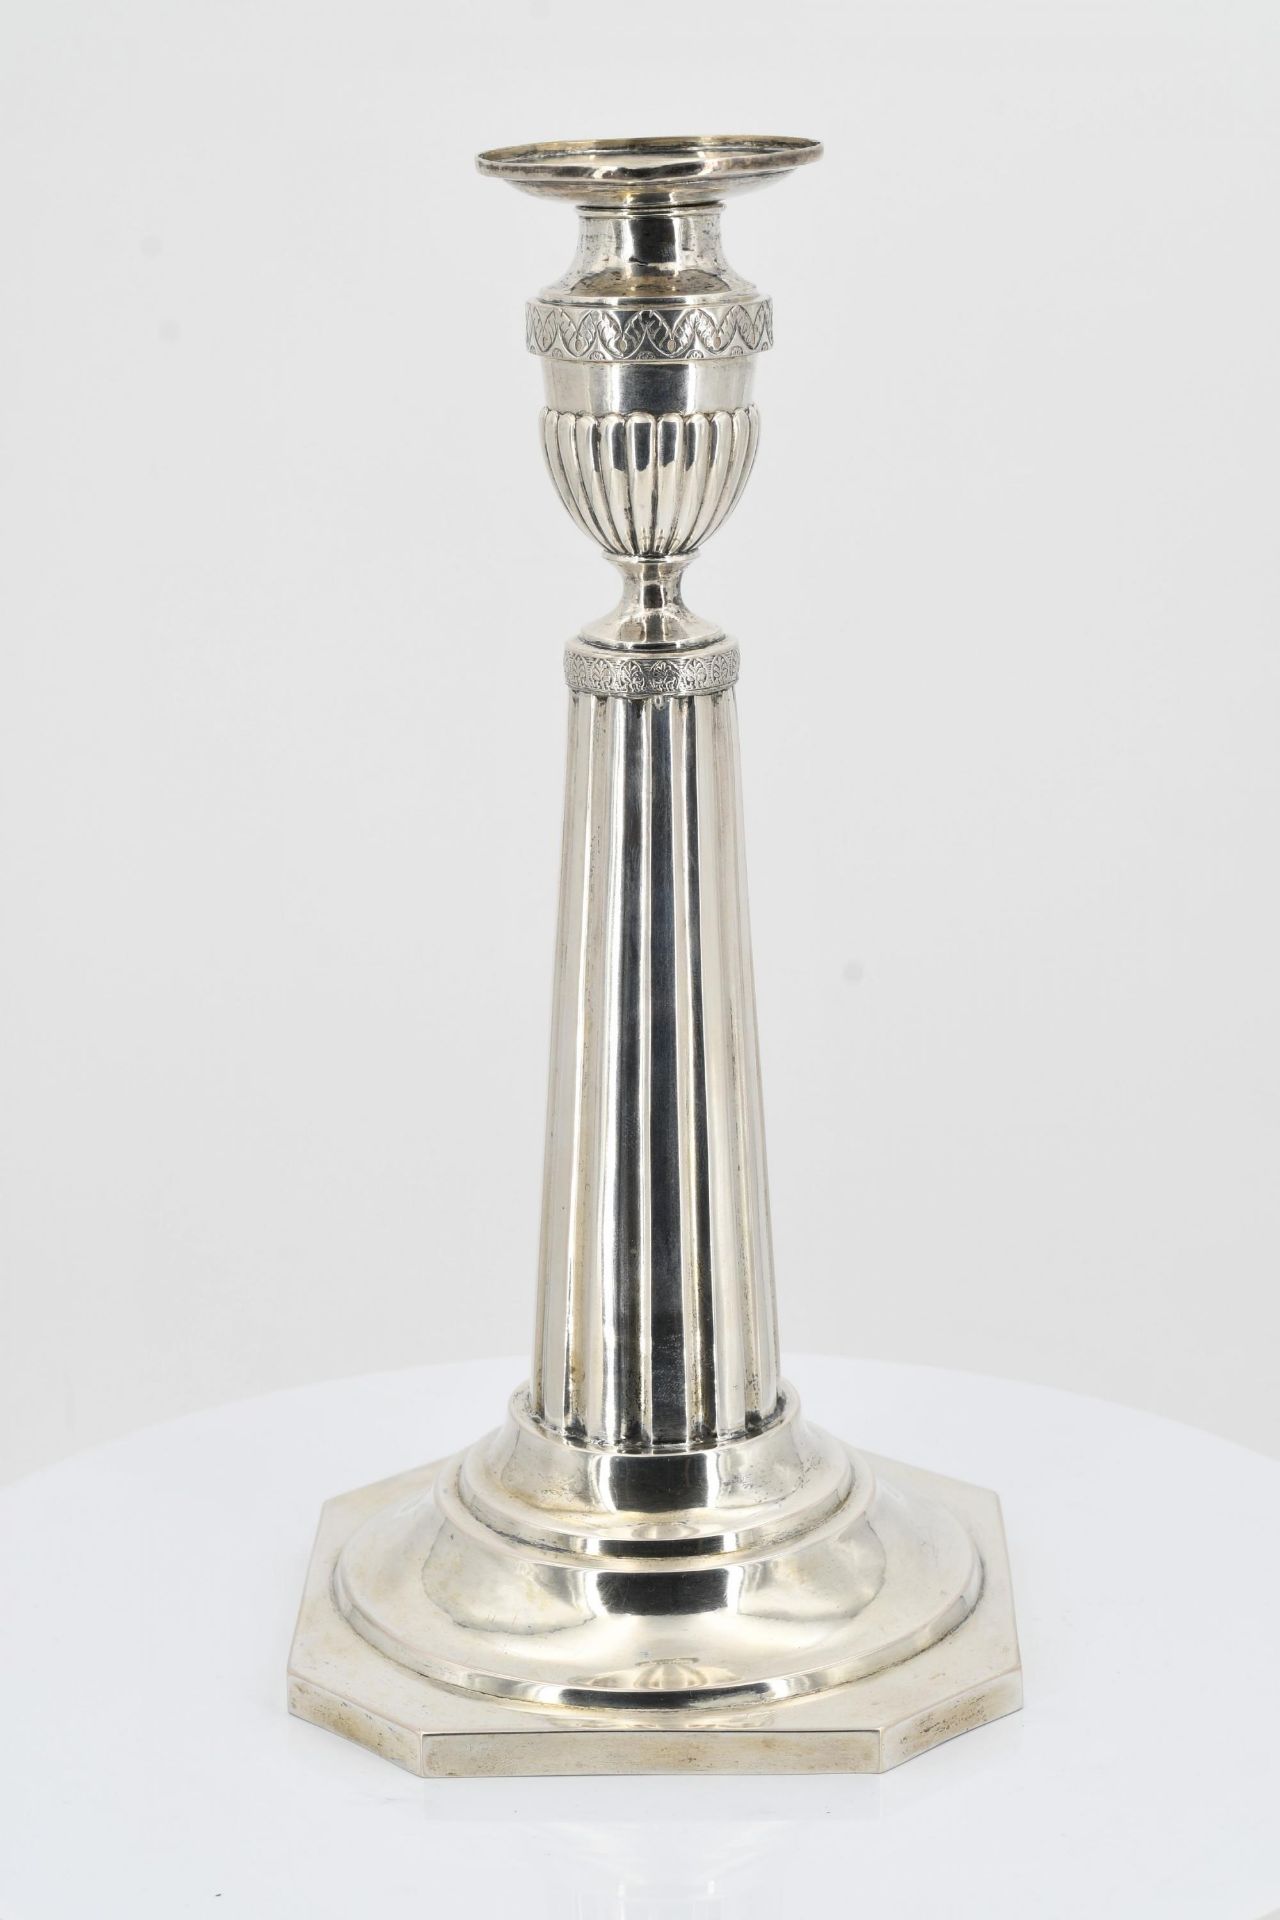 Pair of large candlesticks with fluted shafts - Image 8 of 12